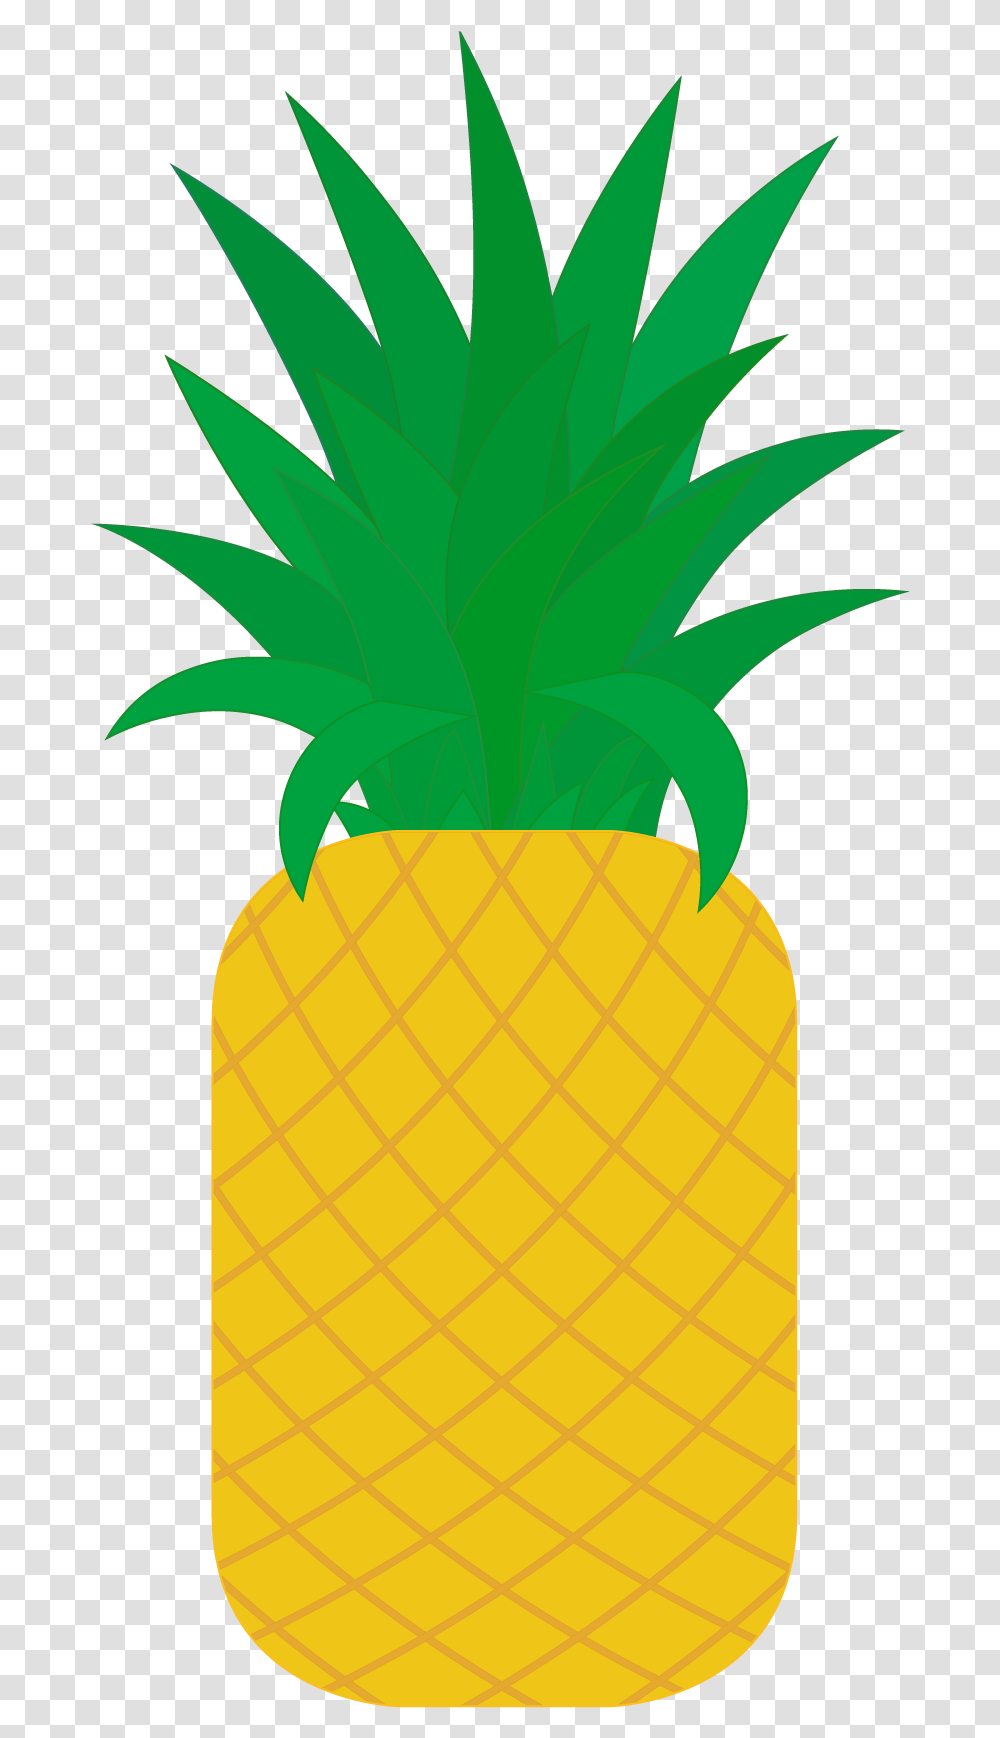 Flat Pineapple Poster Tropical Fruit And Vector Flat Fruit, Plant, Food, Tree, Palm Tree Transparent Png